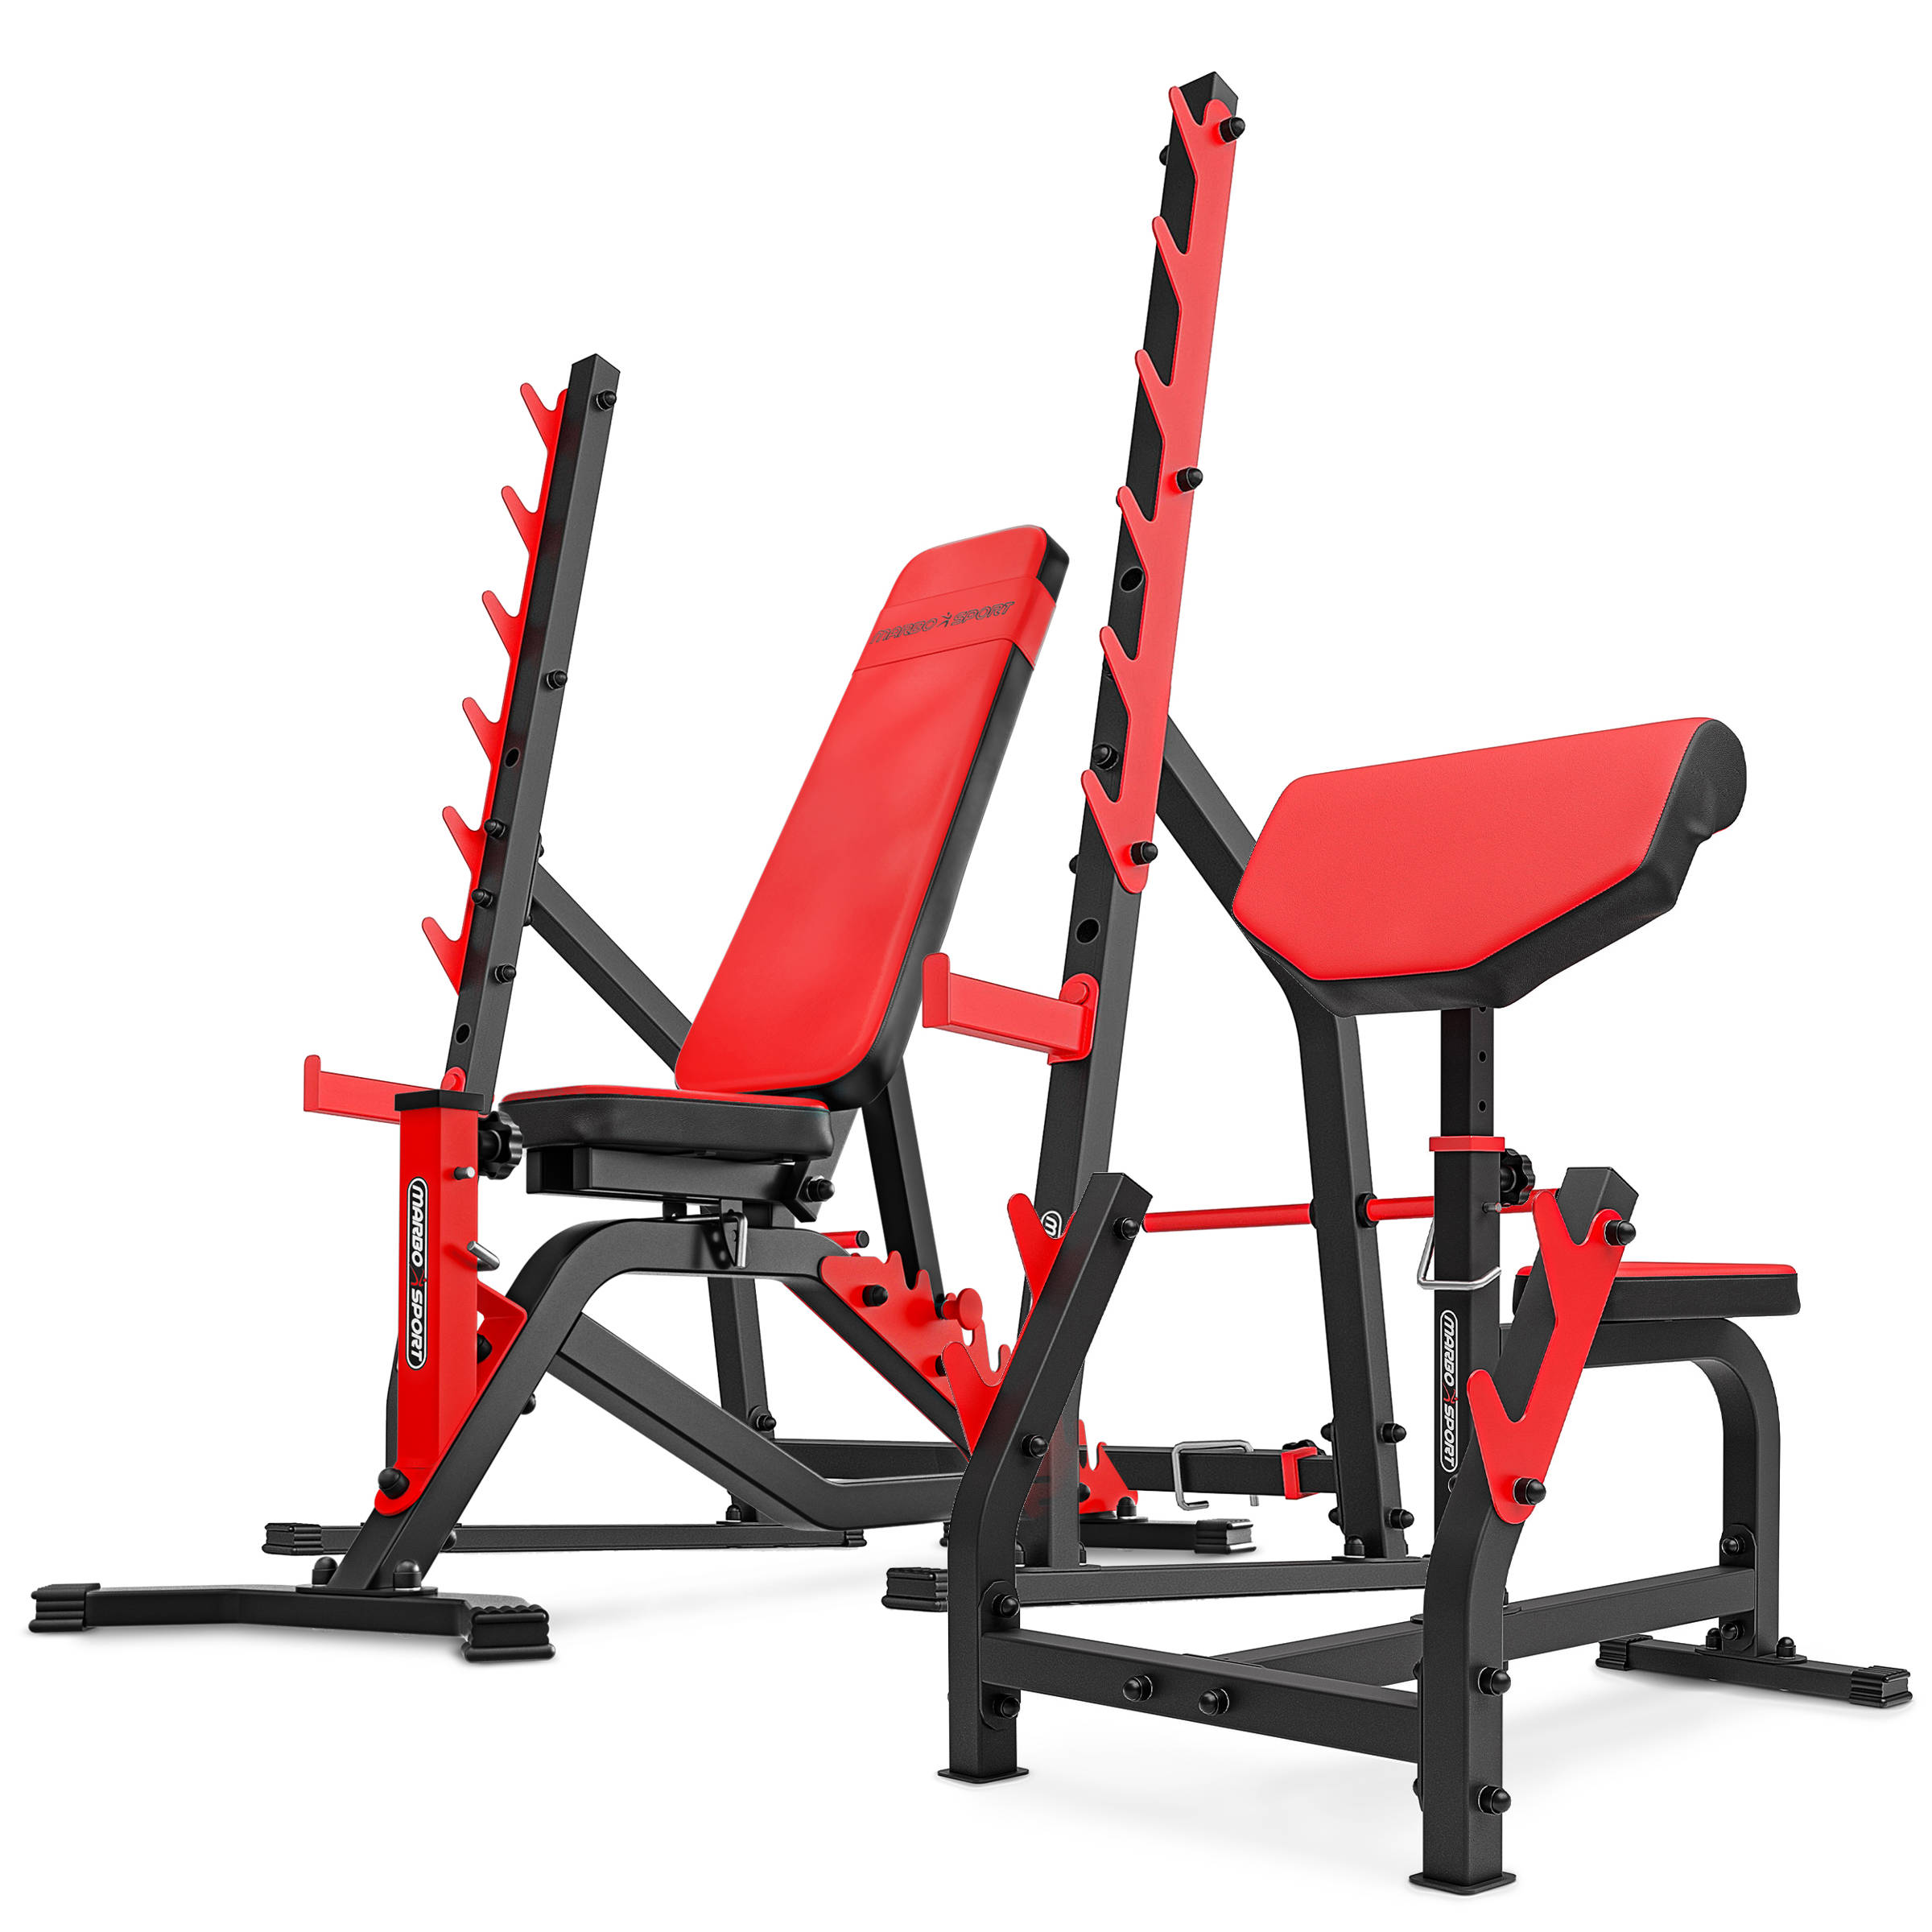 Set MS6 Multi-adjustable bench MS-L101 + Squat rack with spotter catchers MS-S107 + Scott bench Marbo Sport lack | Strength equipment \ Exercise sets \ Exercise sets For intermediate | MarboSport.eu